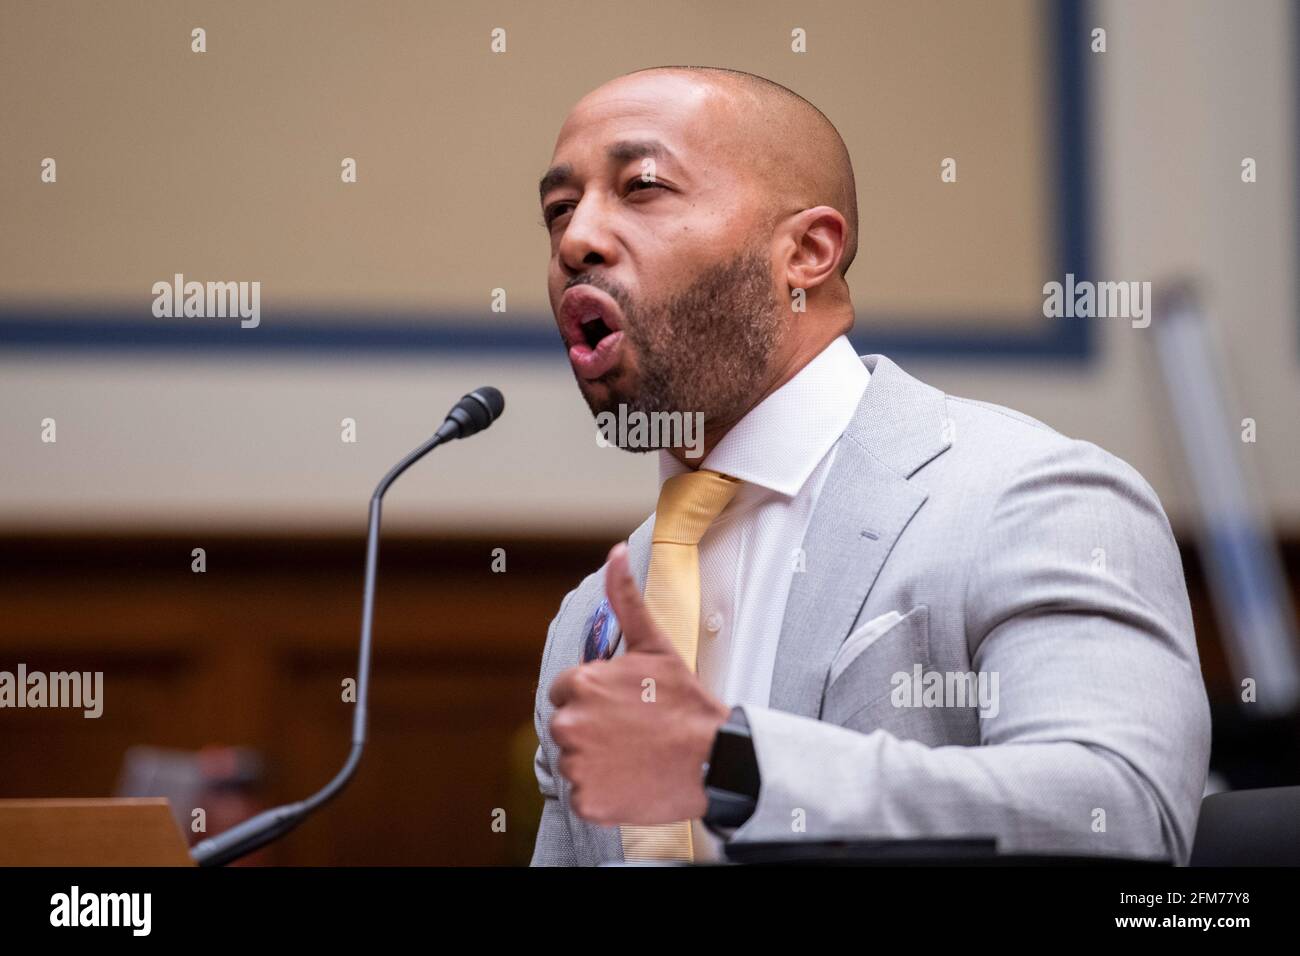 Washington, United States Of America. 06th May, 2021. Charles Johnson, husband of the late Kira Johnson and Founder of 4Kira4Moms, testifies about losing his wife during a routine c-section, as he appears for a House Committee on Oversight and Reform hearing “Birthing While Black: Examining Americas Black Maternal Health Crisis” in the Rayburn House Office Building in Washington, DC, Thursday, May 6, 2021. Credit: Rod Lamkey/CNP/Sipa USA Credit: Sipa USA/Alamy Live News Stock Photo